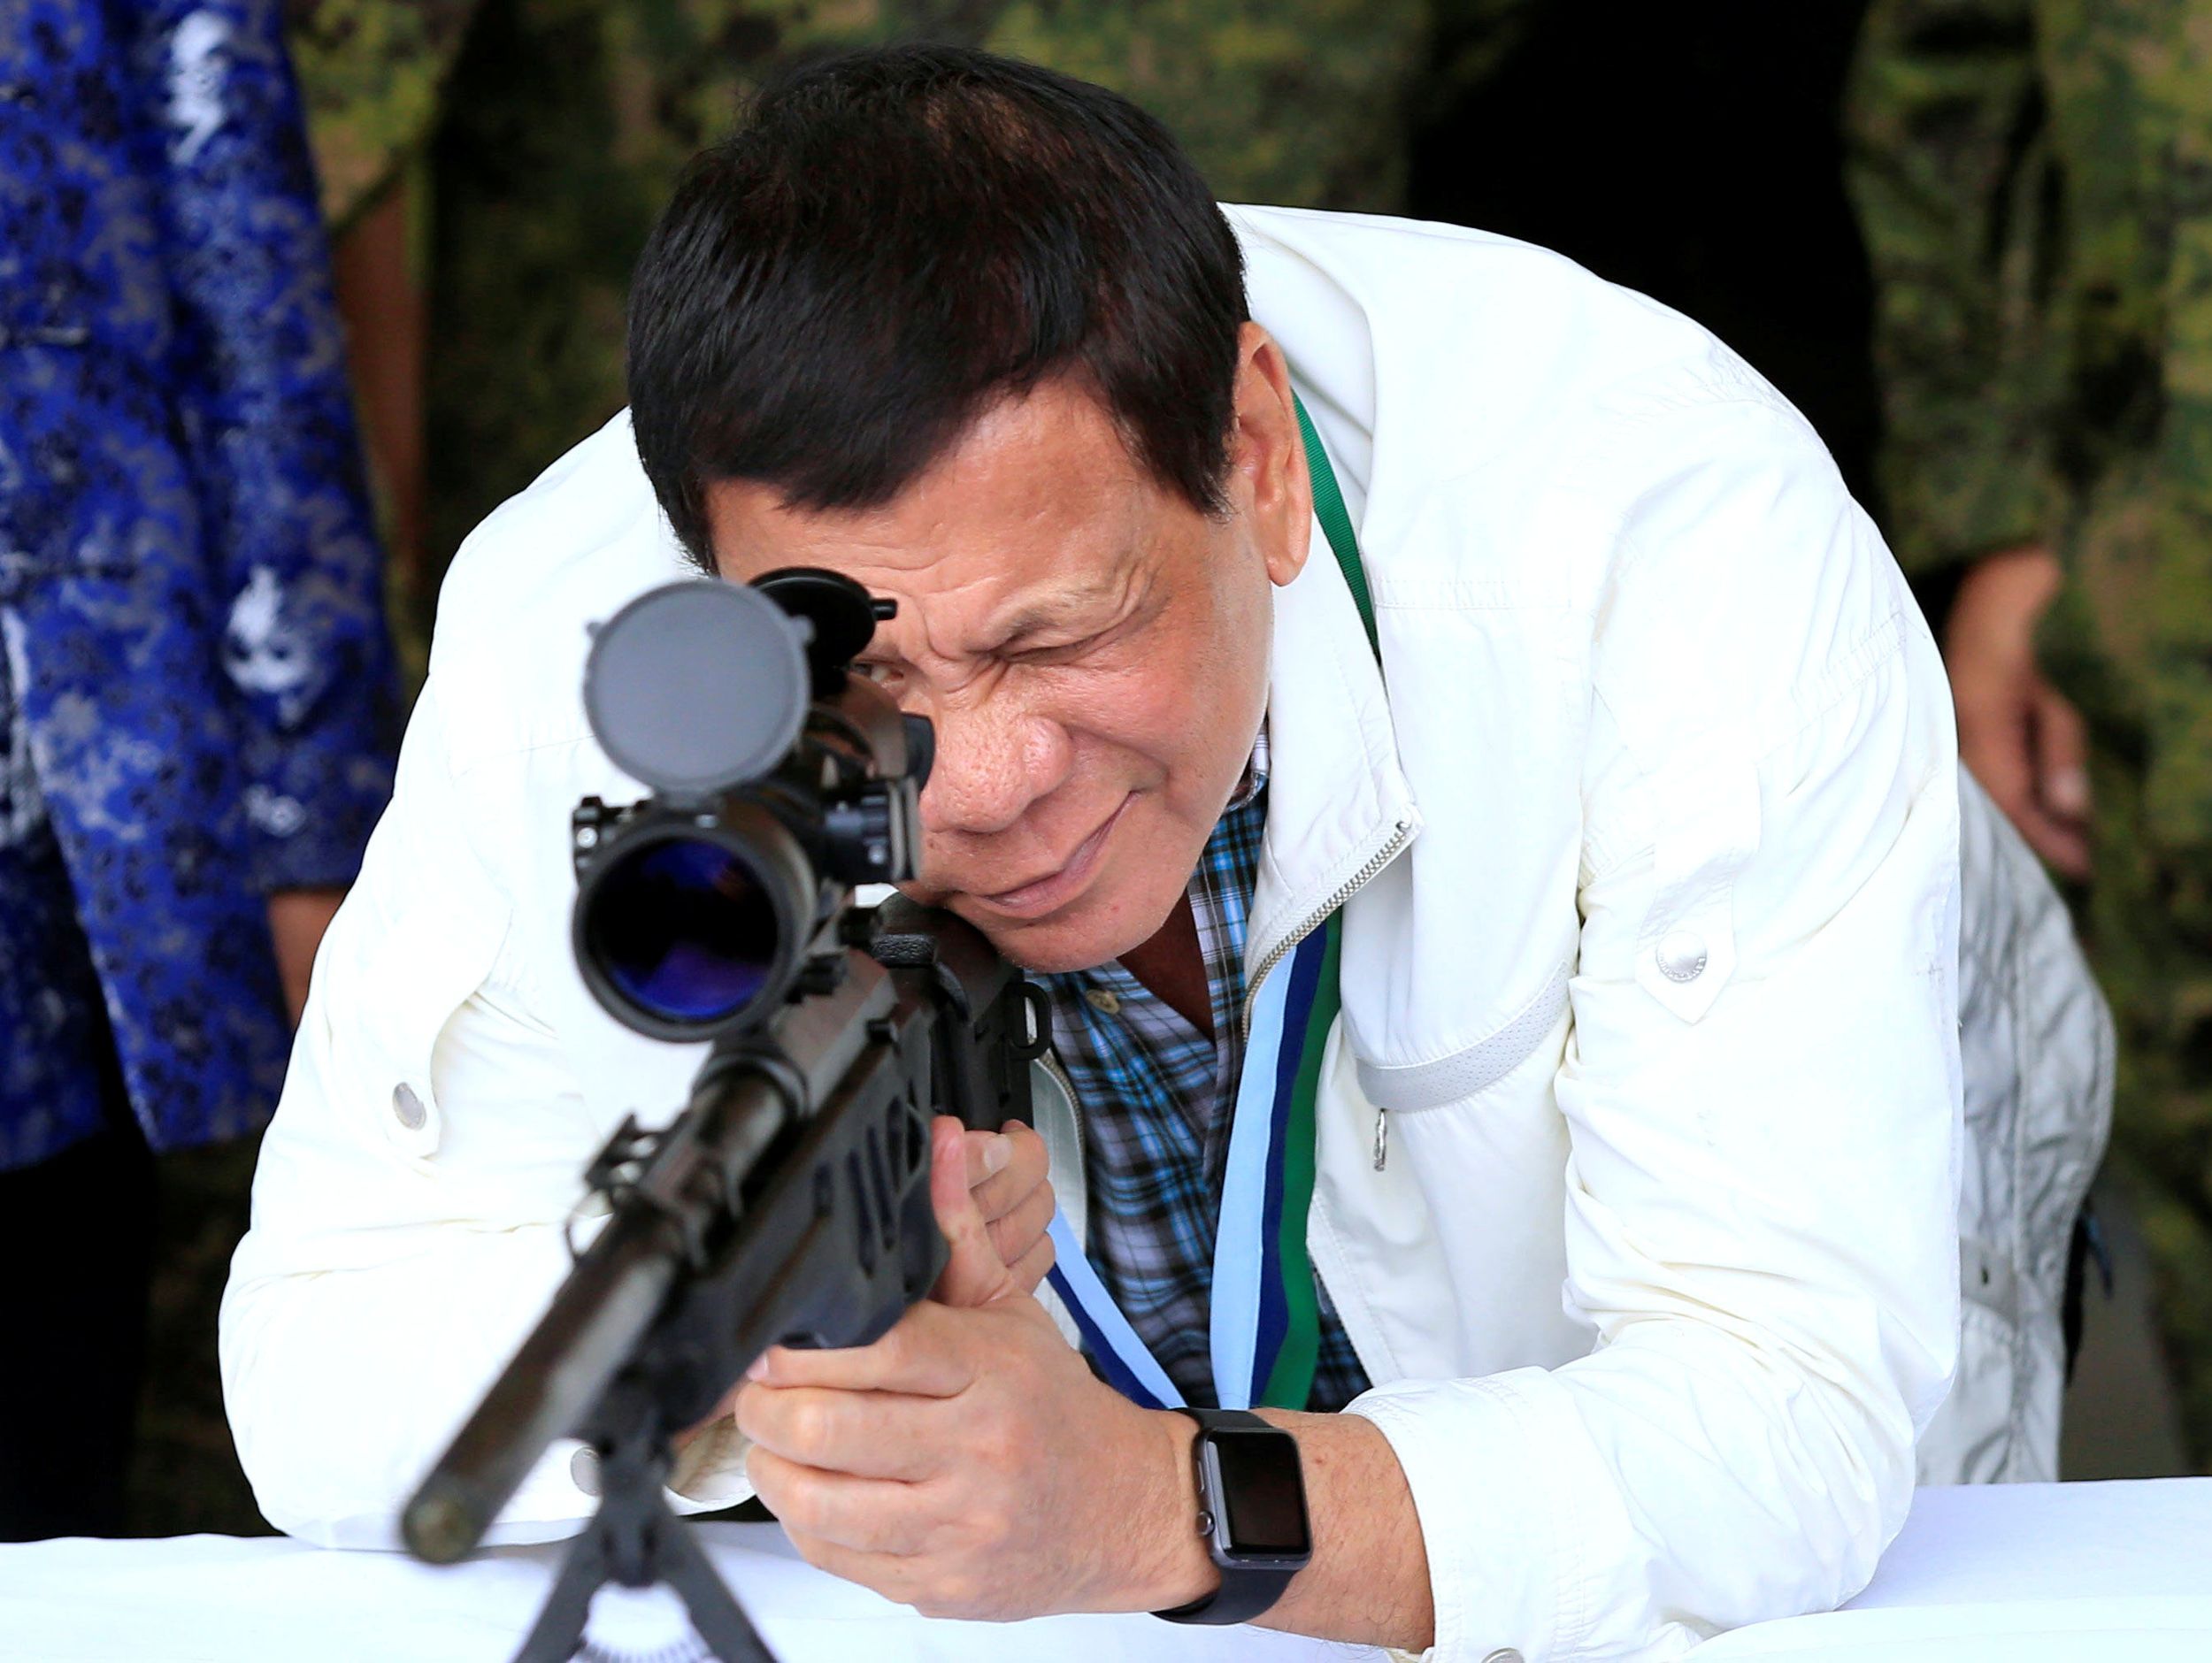 Hard Numbers: Duterte's drug war kills kids, global hunger surges, Mexican narcos strike, Japans army thins